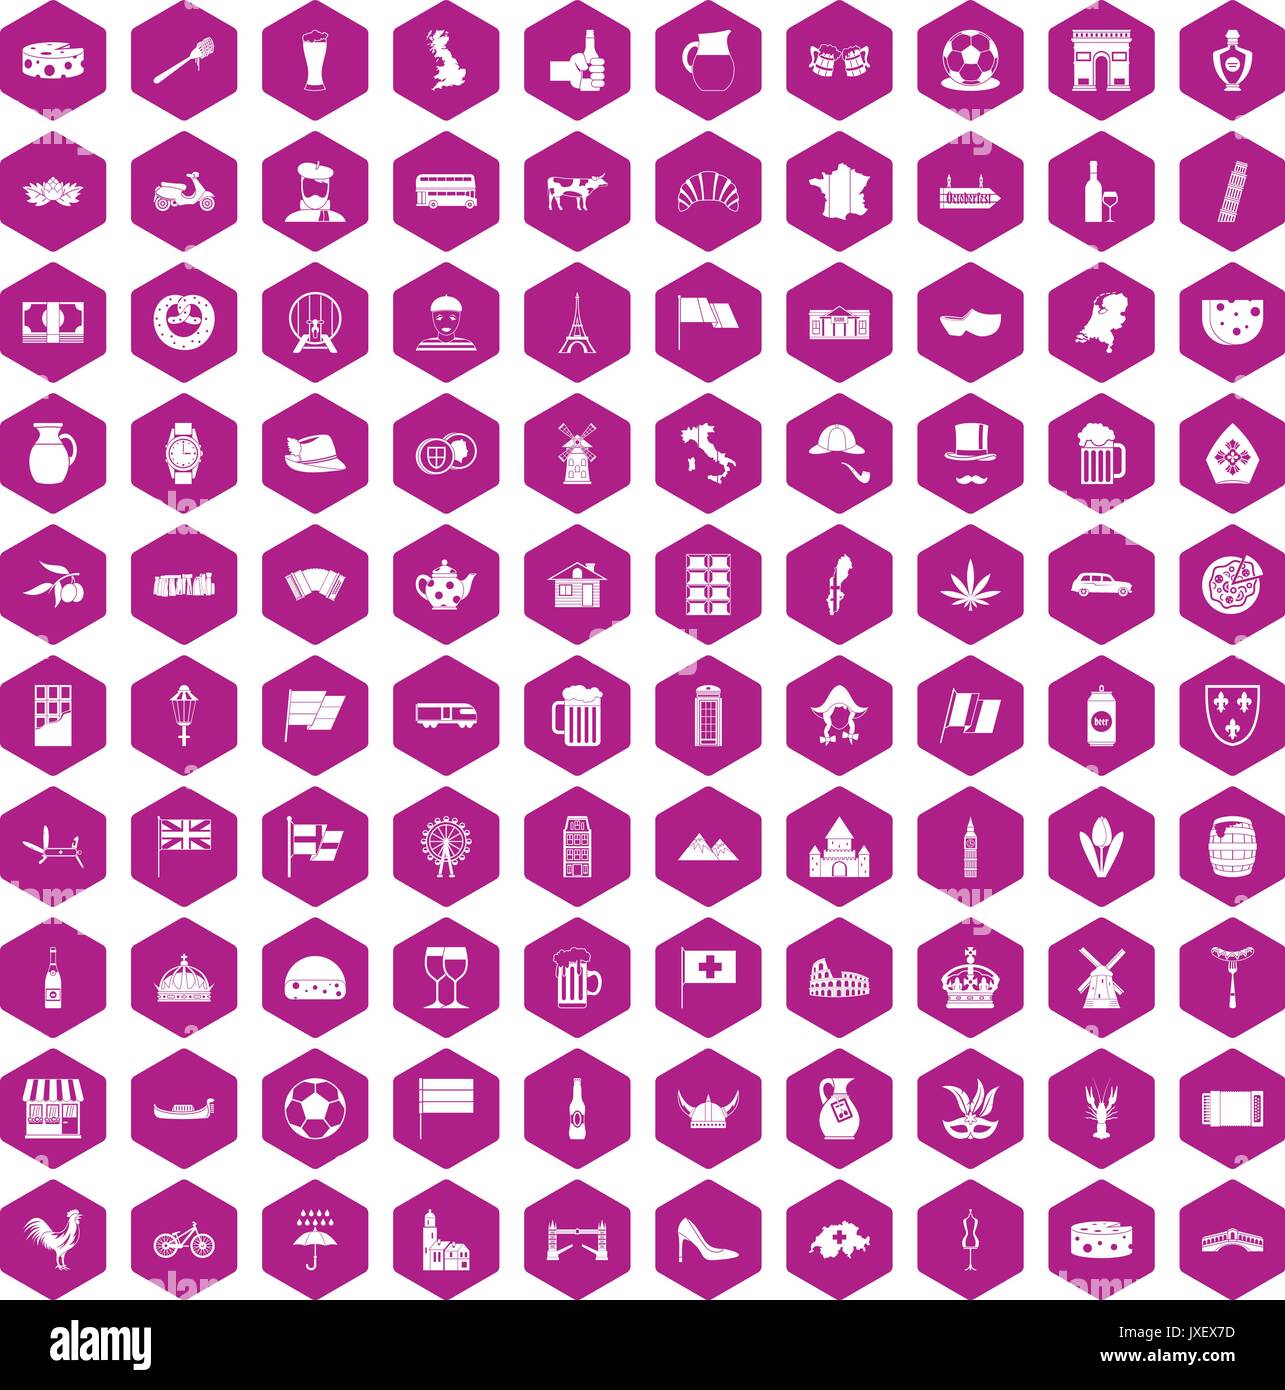 100 europe countries icons hexagon violet Stock Vector